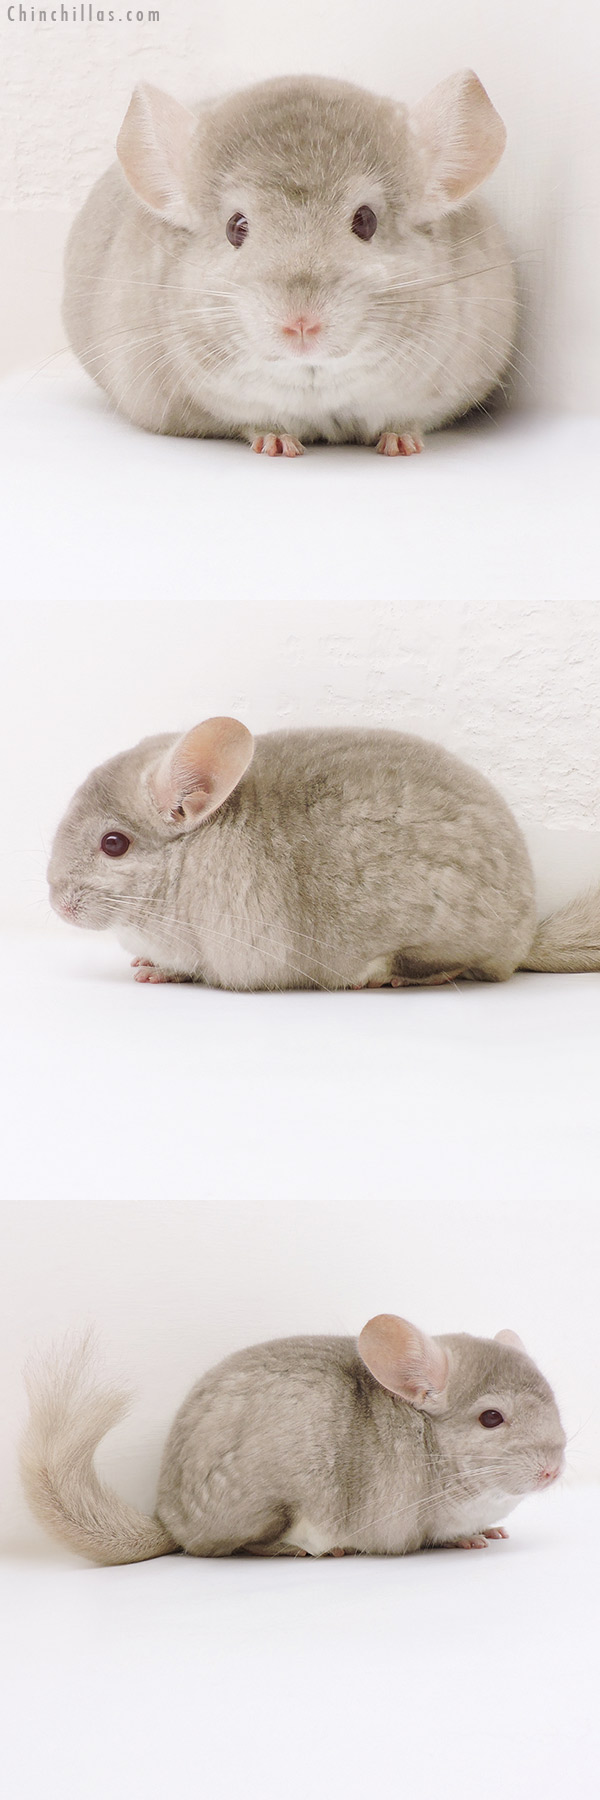 Chinchilla or related item offered for sale or export on Chinchillas.com - 17158 Show Quality Homo Beige Female Chinchilla